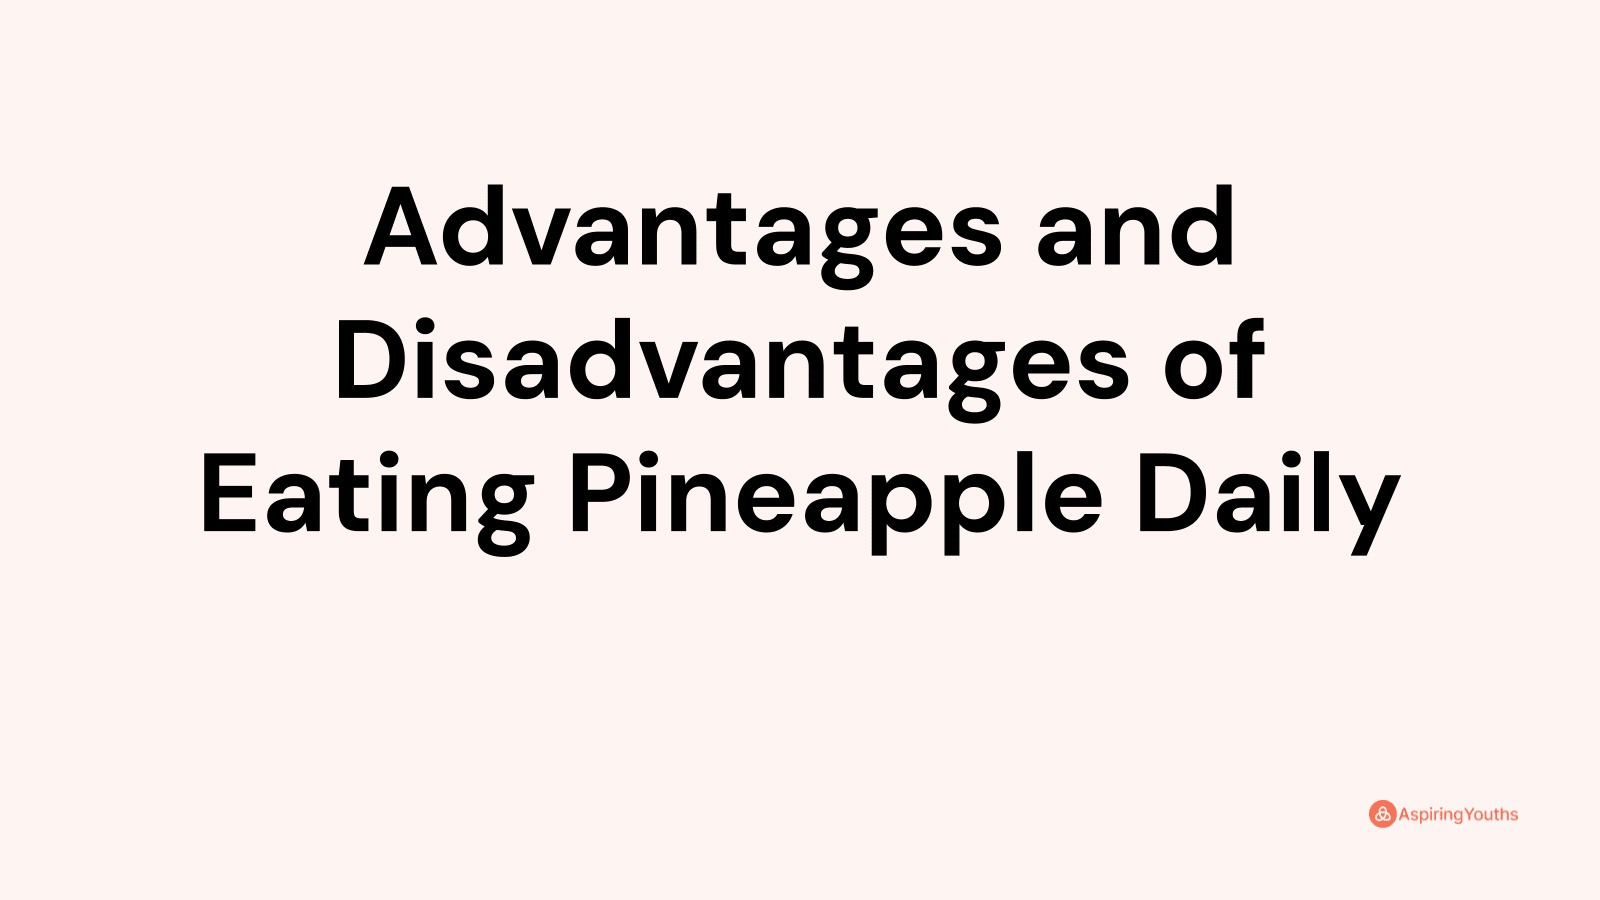 Advantages and disadvantages of Eating Pineapple Daily